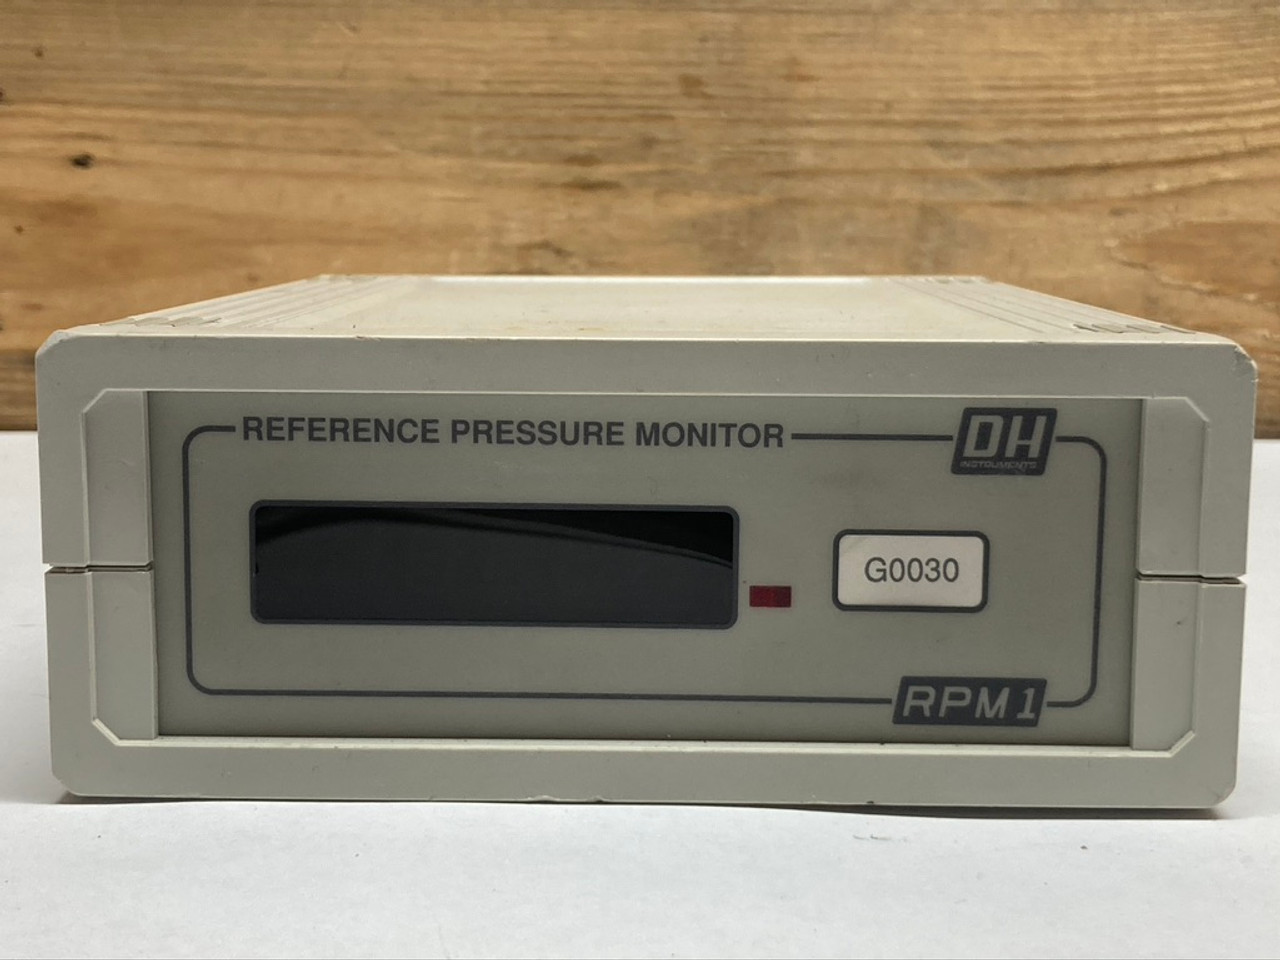 Multi-Range Reference Pressure Monitor RPM1-G0030 400132 DH Instruments